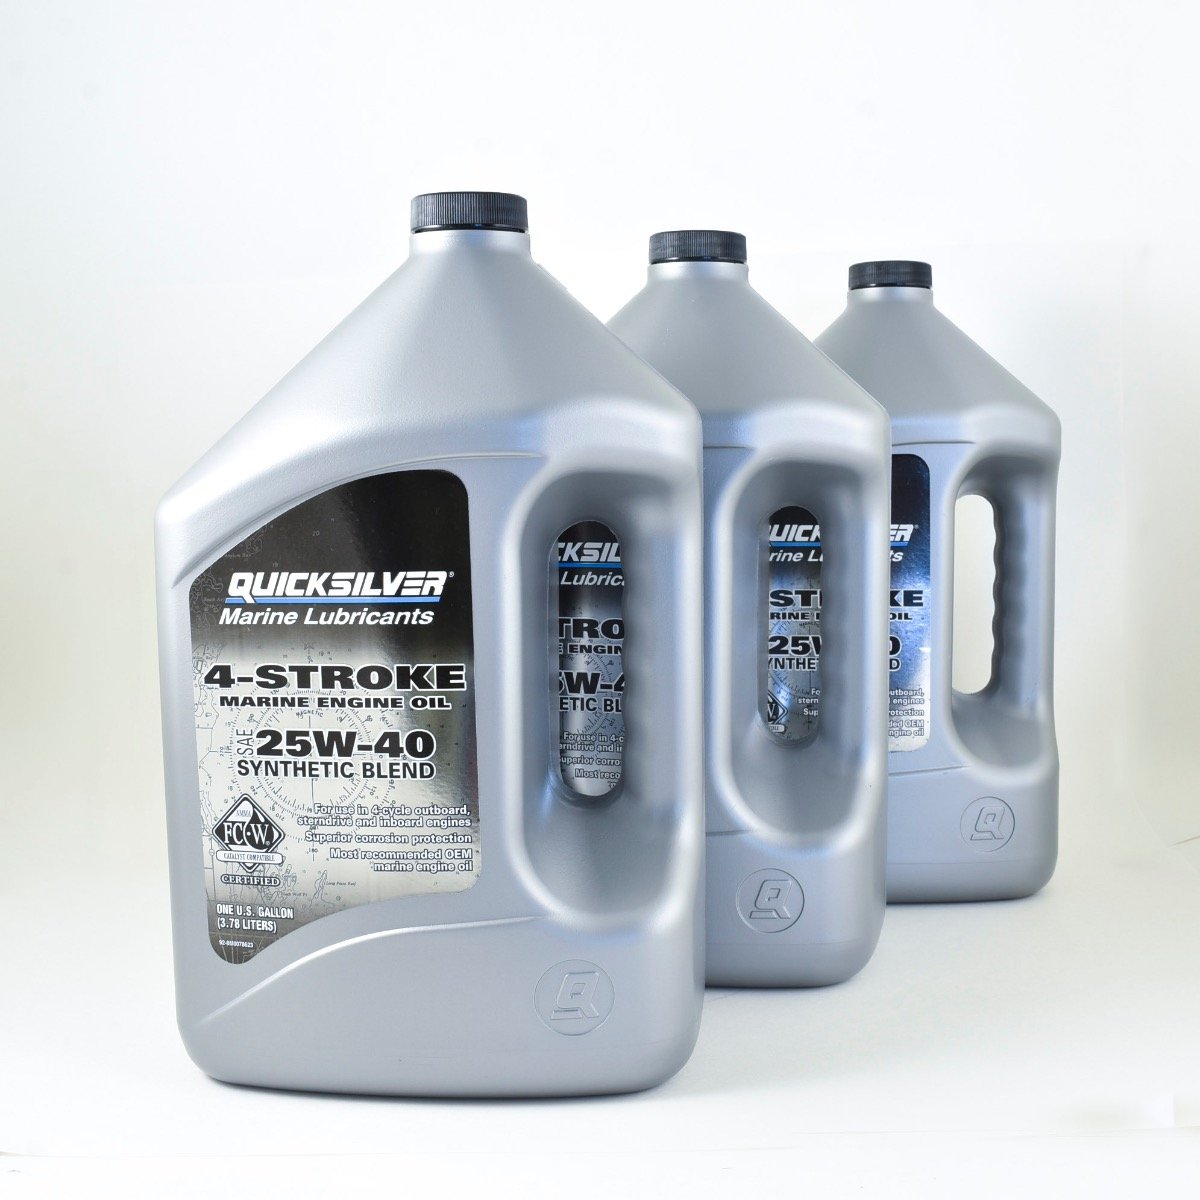 Quicksilver 4"‘Stroke Marine Oil Synthetic Blend 25W40 - Gallon - 92-8M0078623 - 3-pack